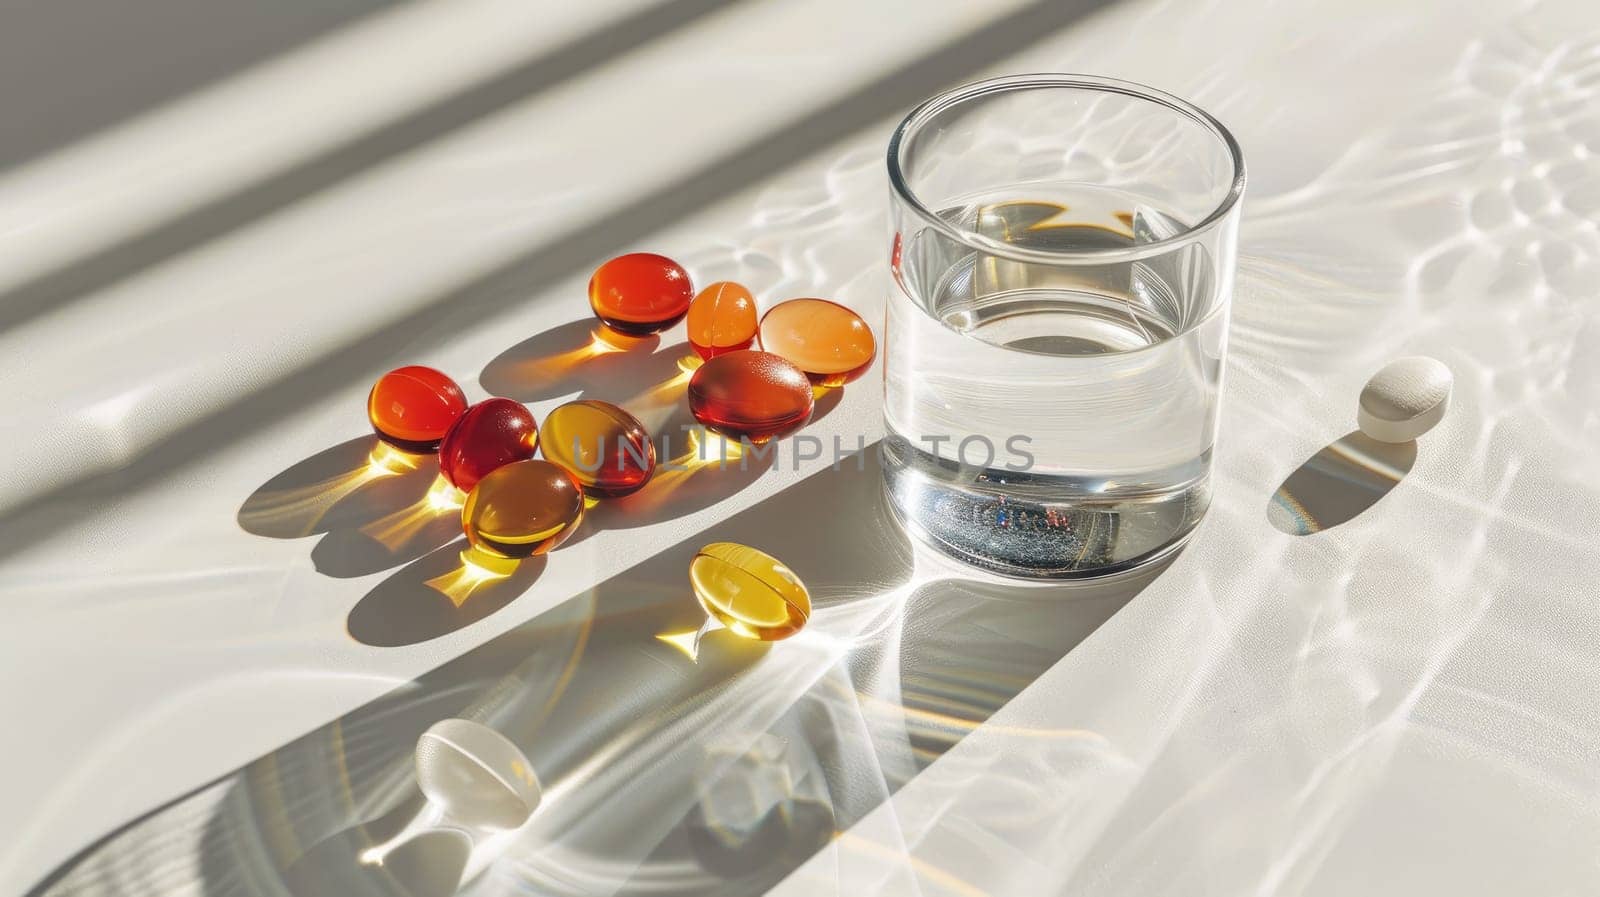 Daily Health Supplements - Neatly Arranged Variety of Vitamin Tablets, Pills, and Capsules with Glass of Water on White Surface.